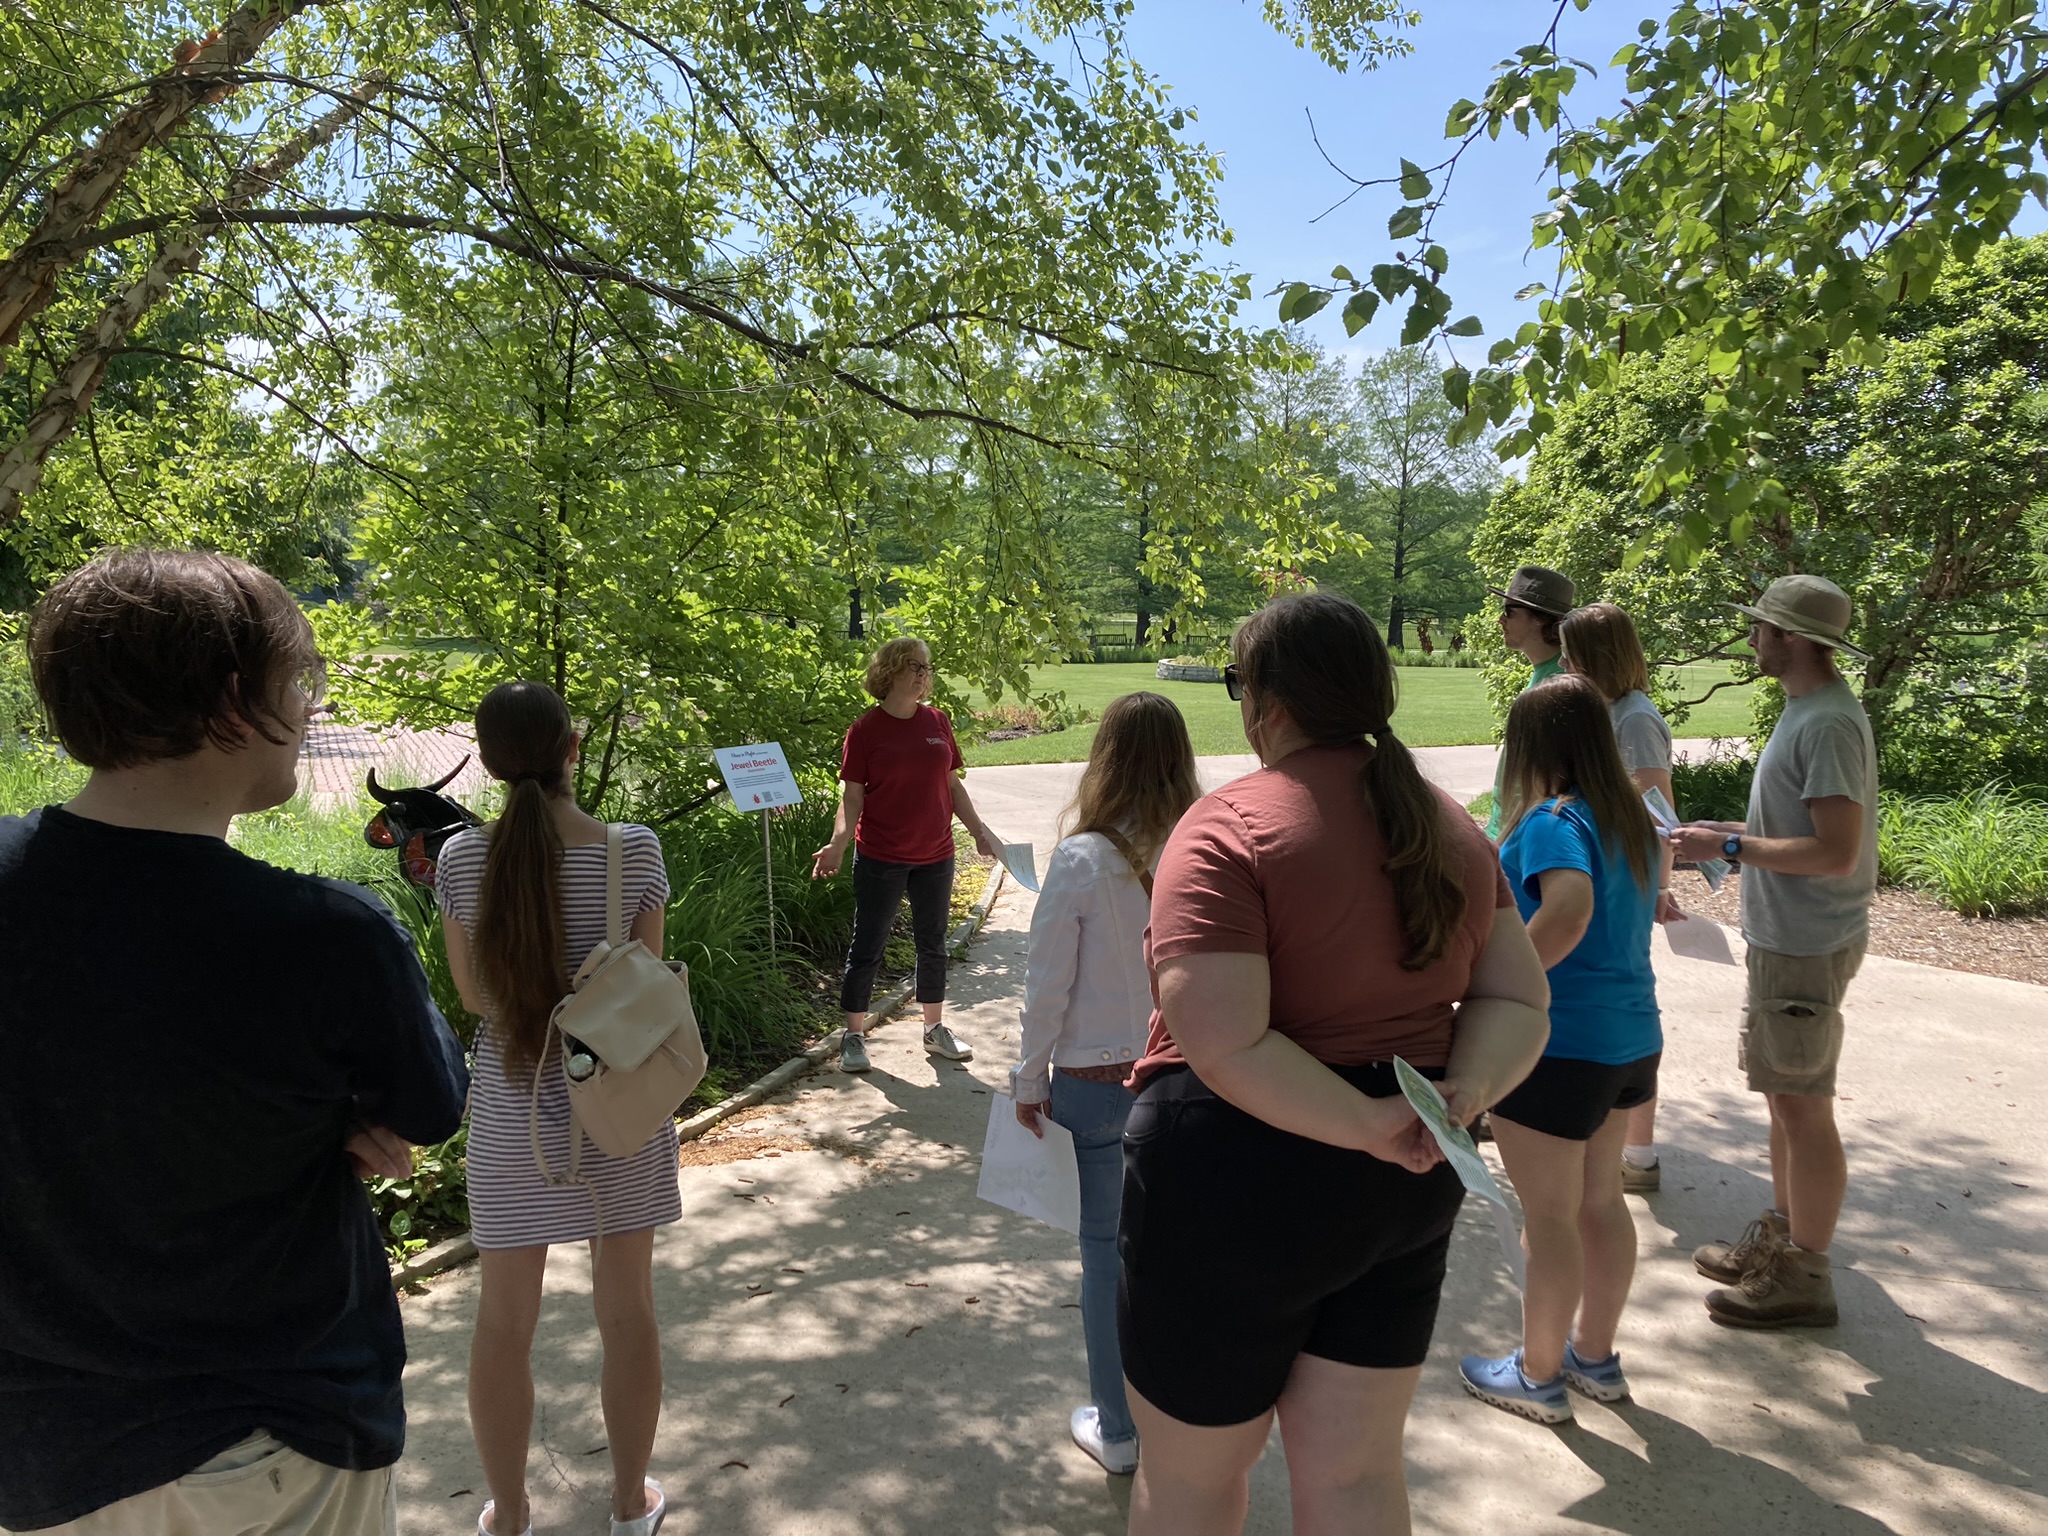 Entomology staff member Anita stands before a group of visitors, leading a tour about insects in the gardens.